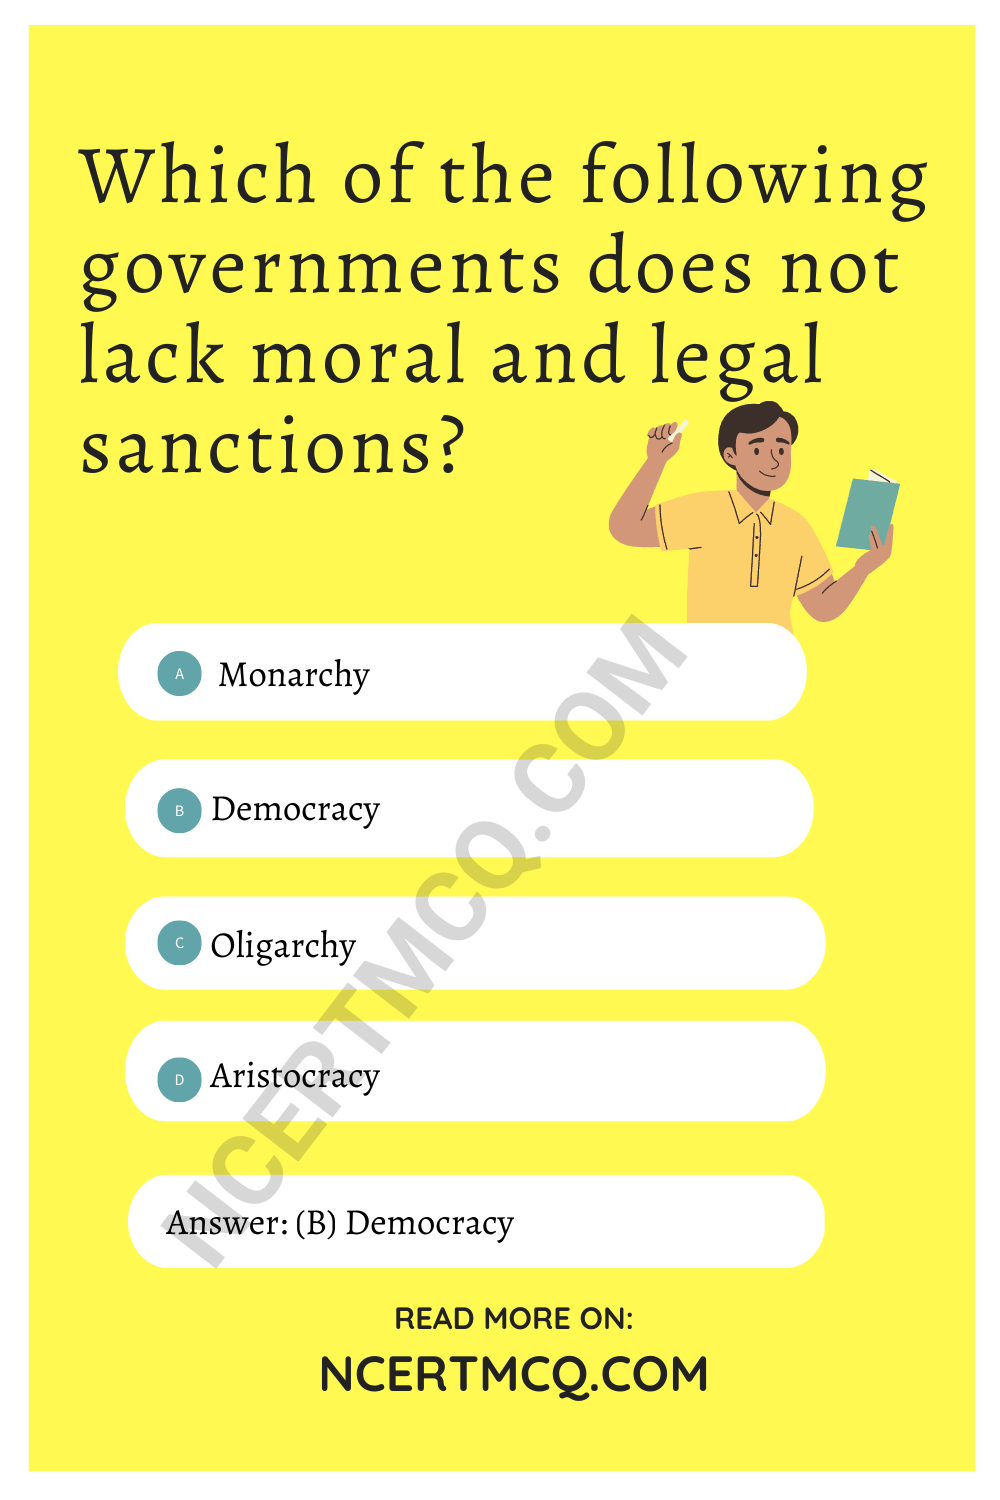 Which of the following governments does not lack moral and legal sanctions?